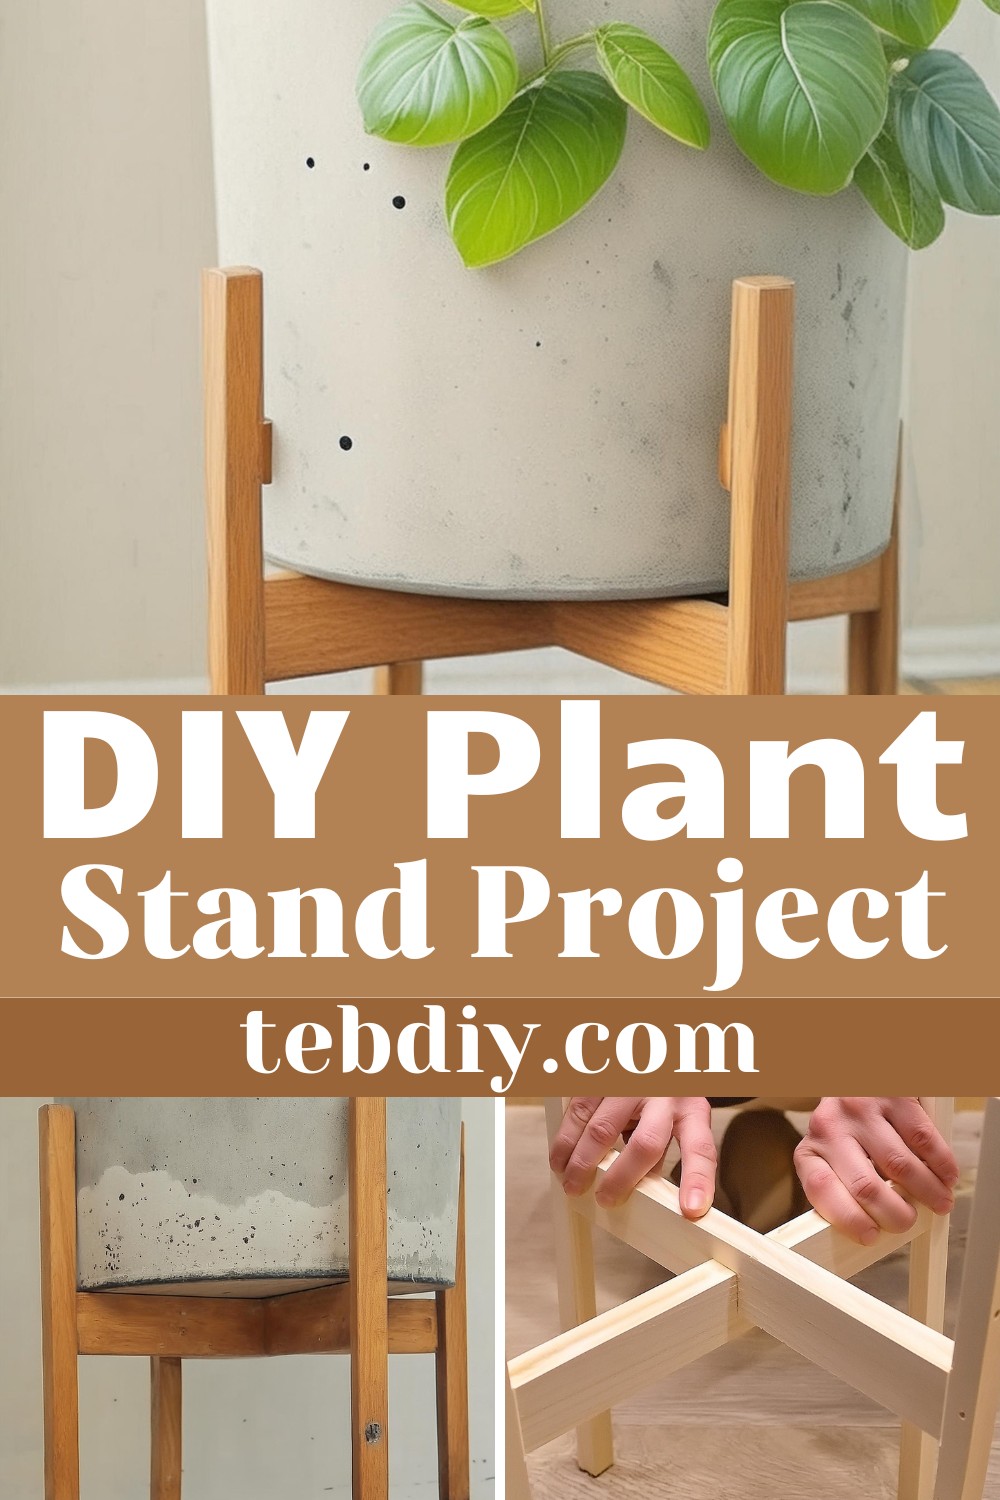 DIY Plant Stand Project